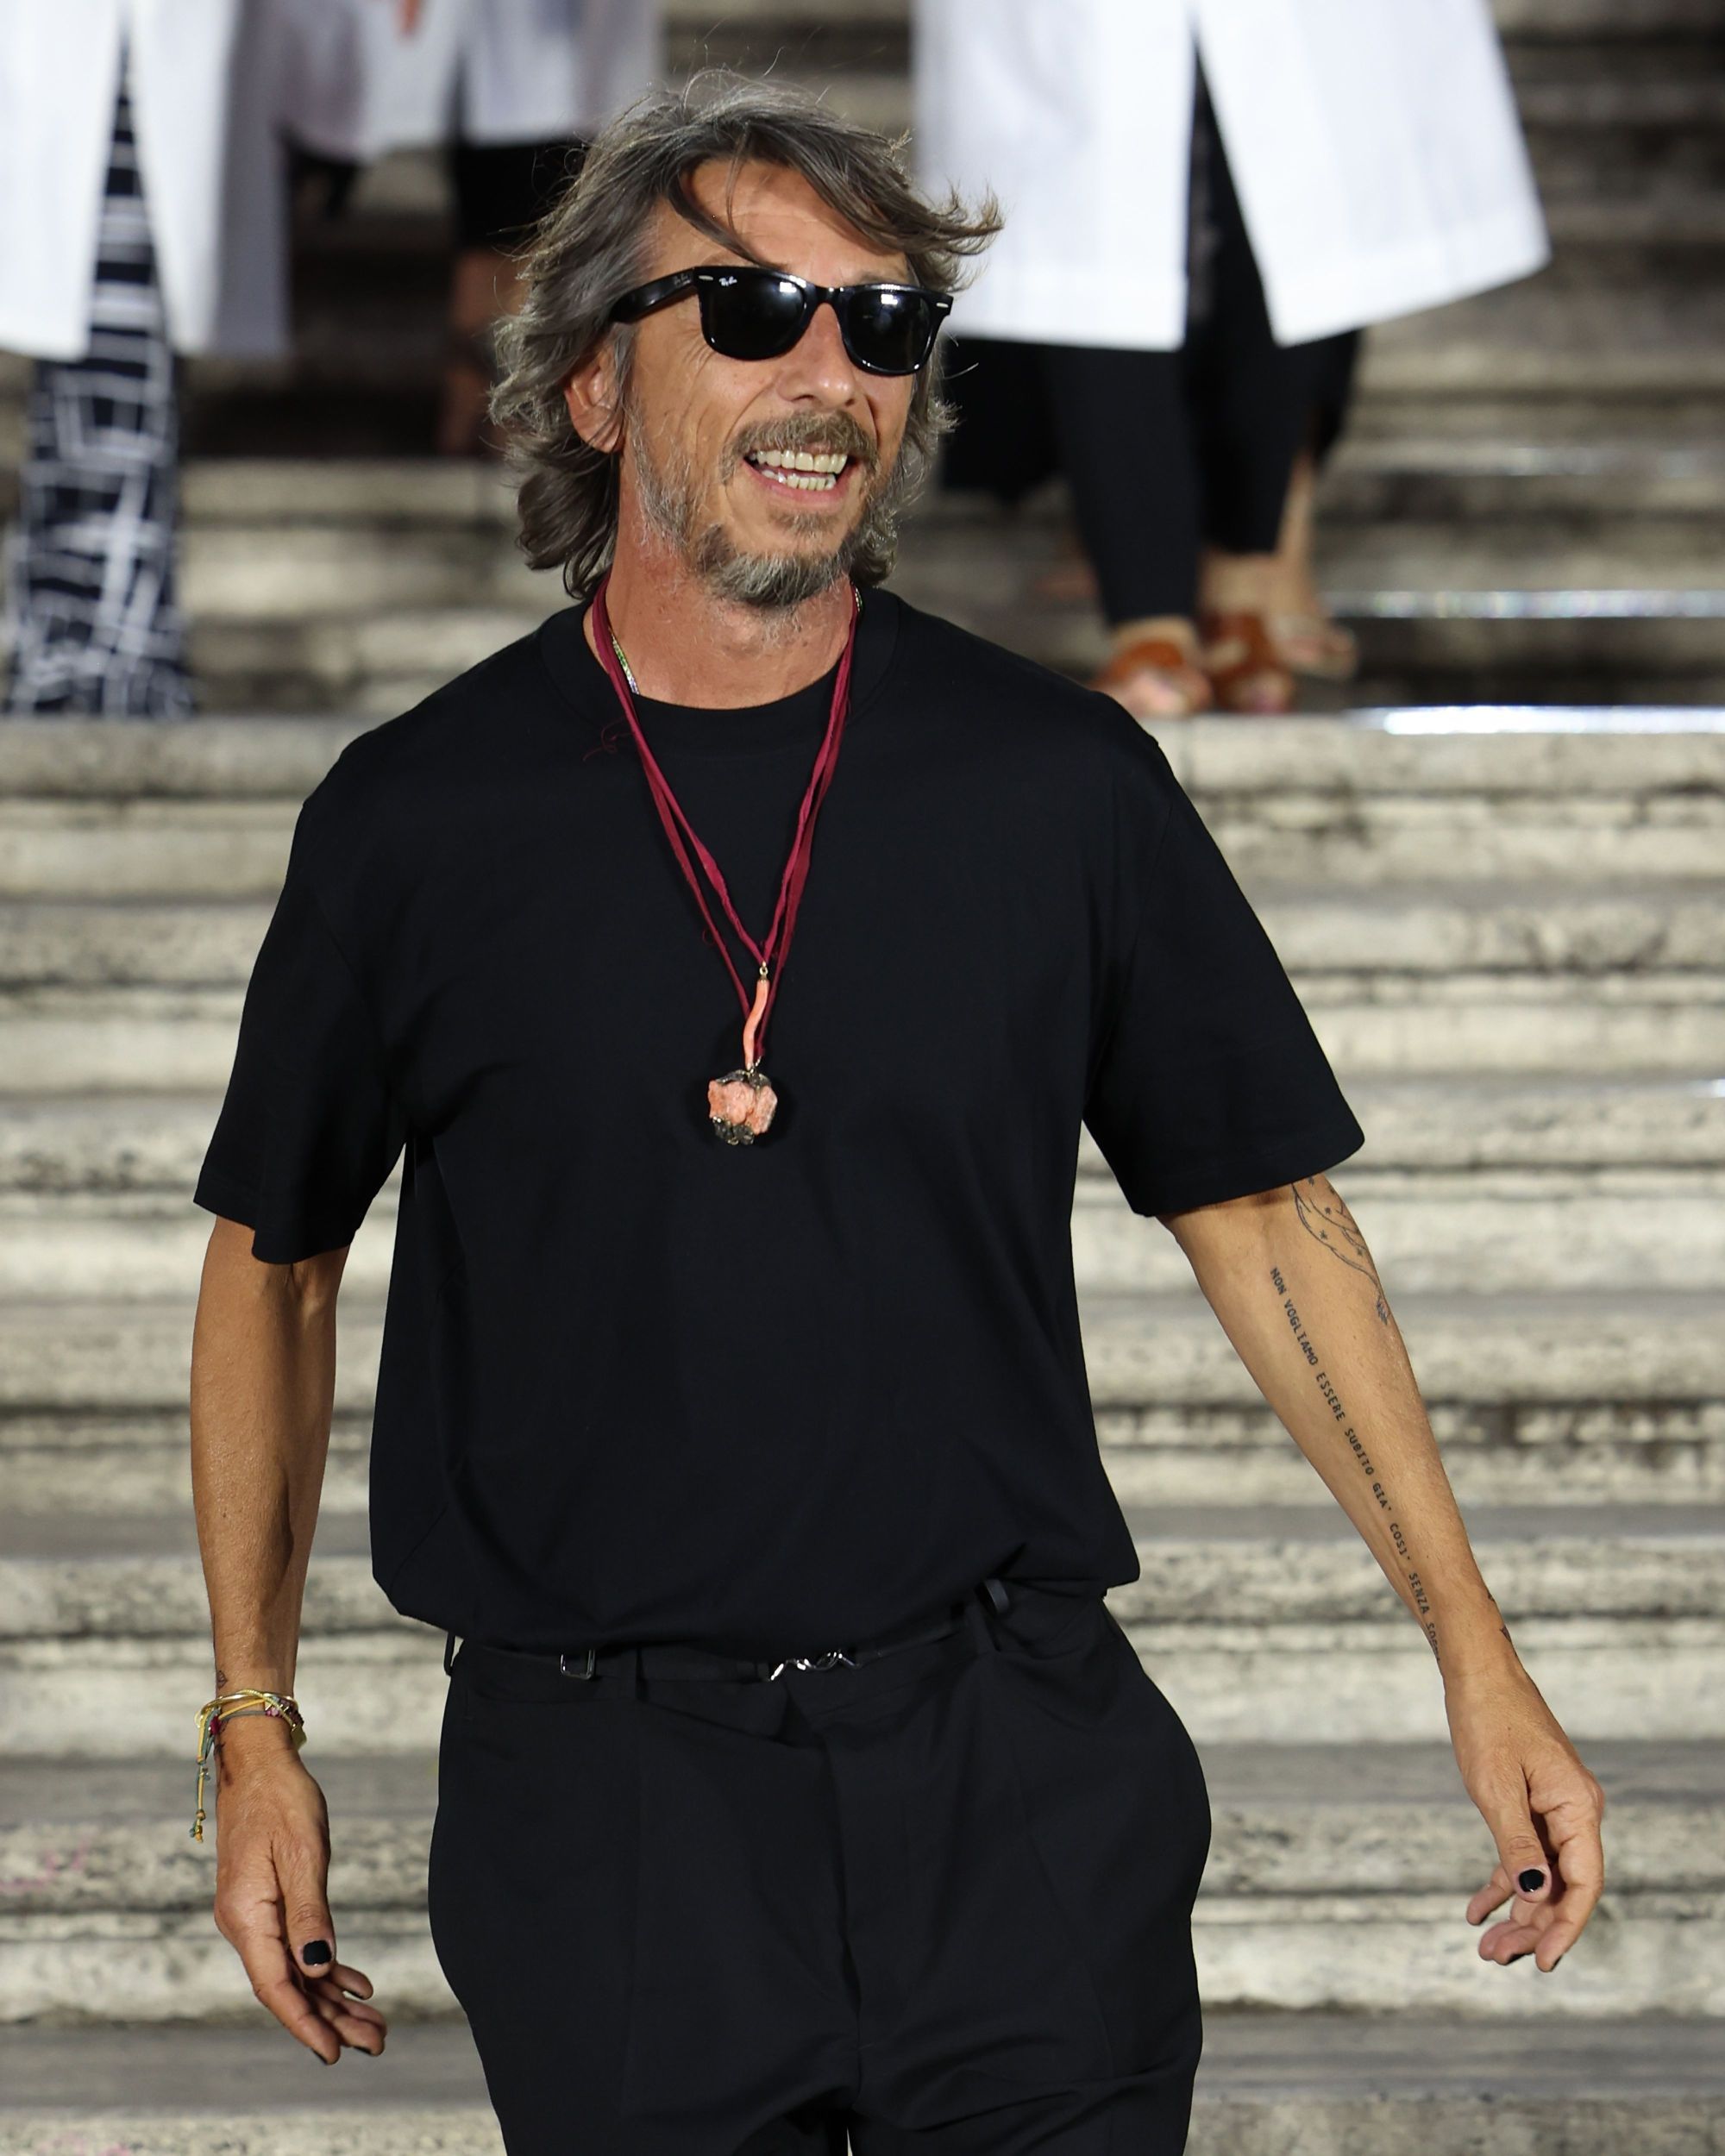 Pierpaolo Piccioli leaves Valentino Over the past 25 years, the designer has rewritten the brand's history